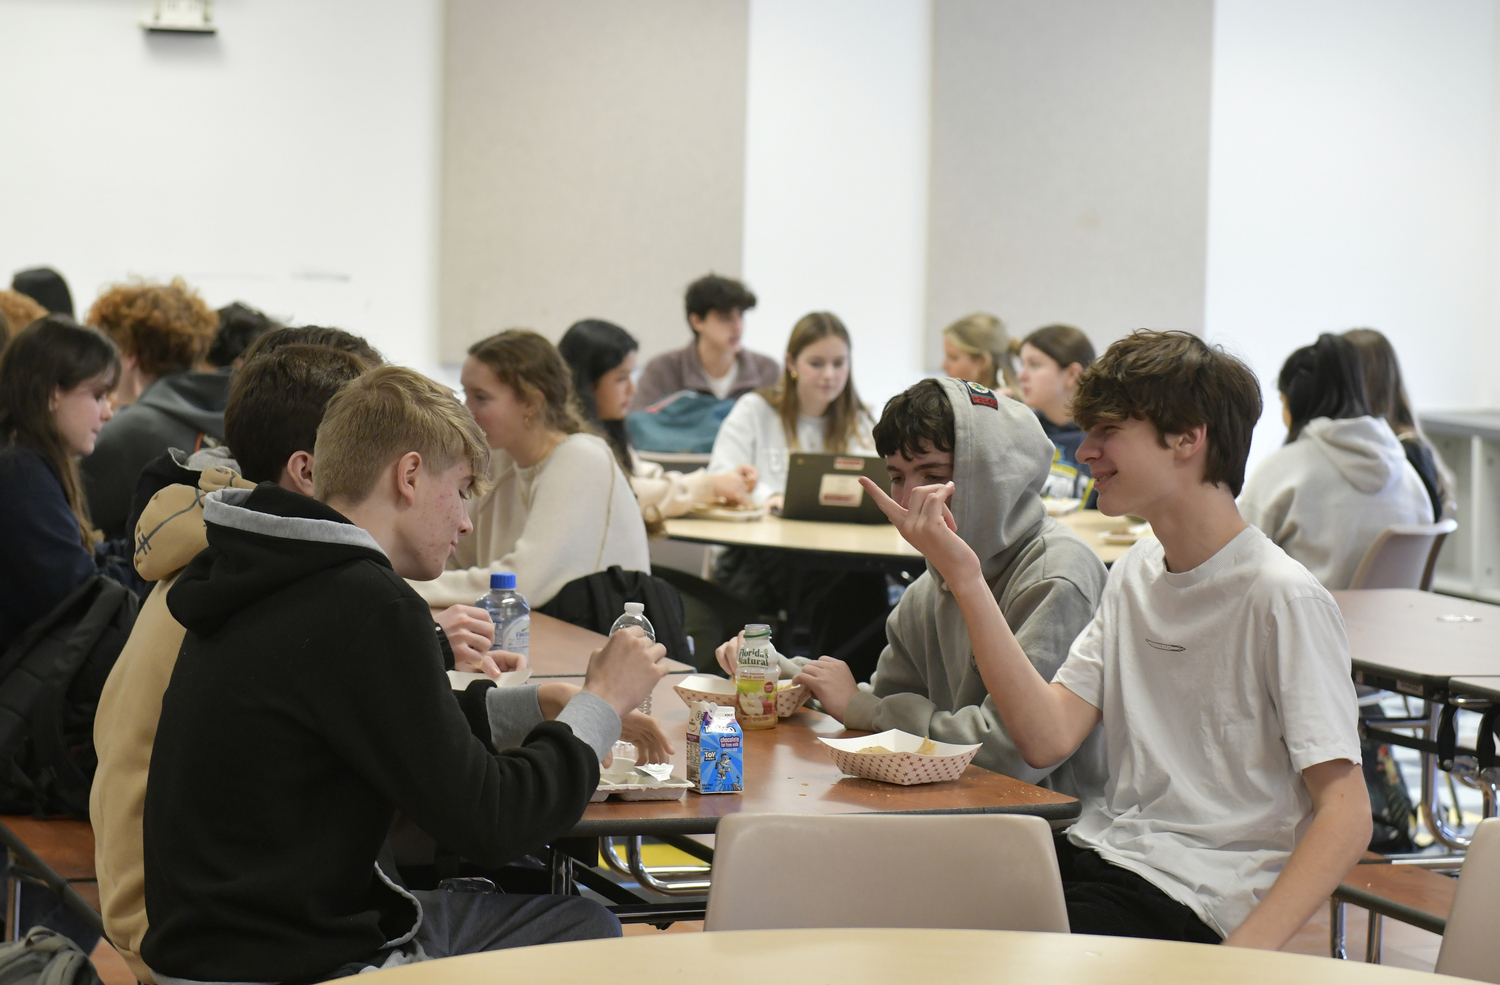 Students at Pierson High chat and enjoy their lunches instead of checking their phones.  DANA SHAW